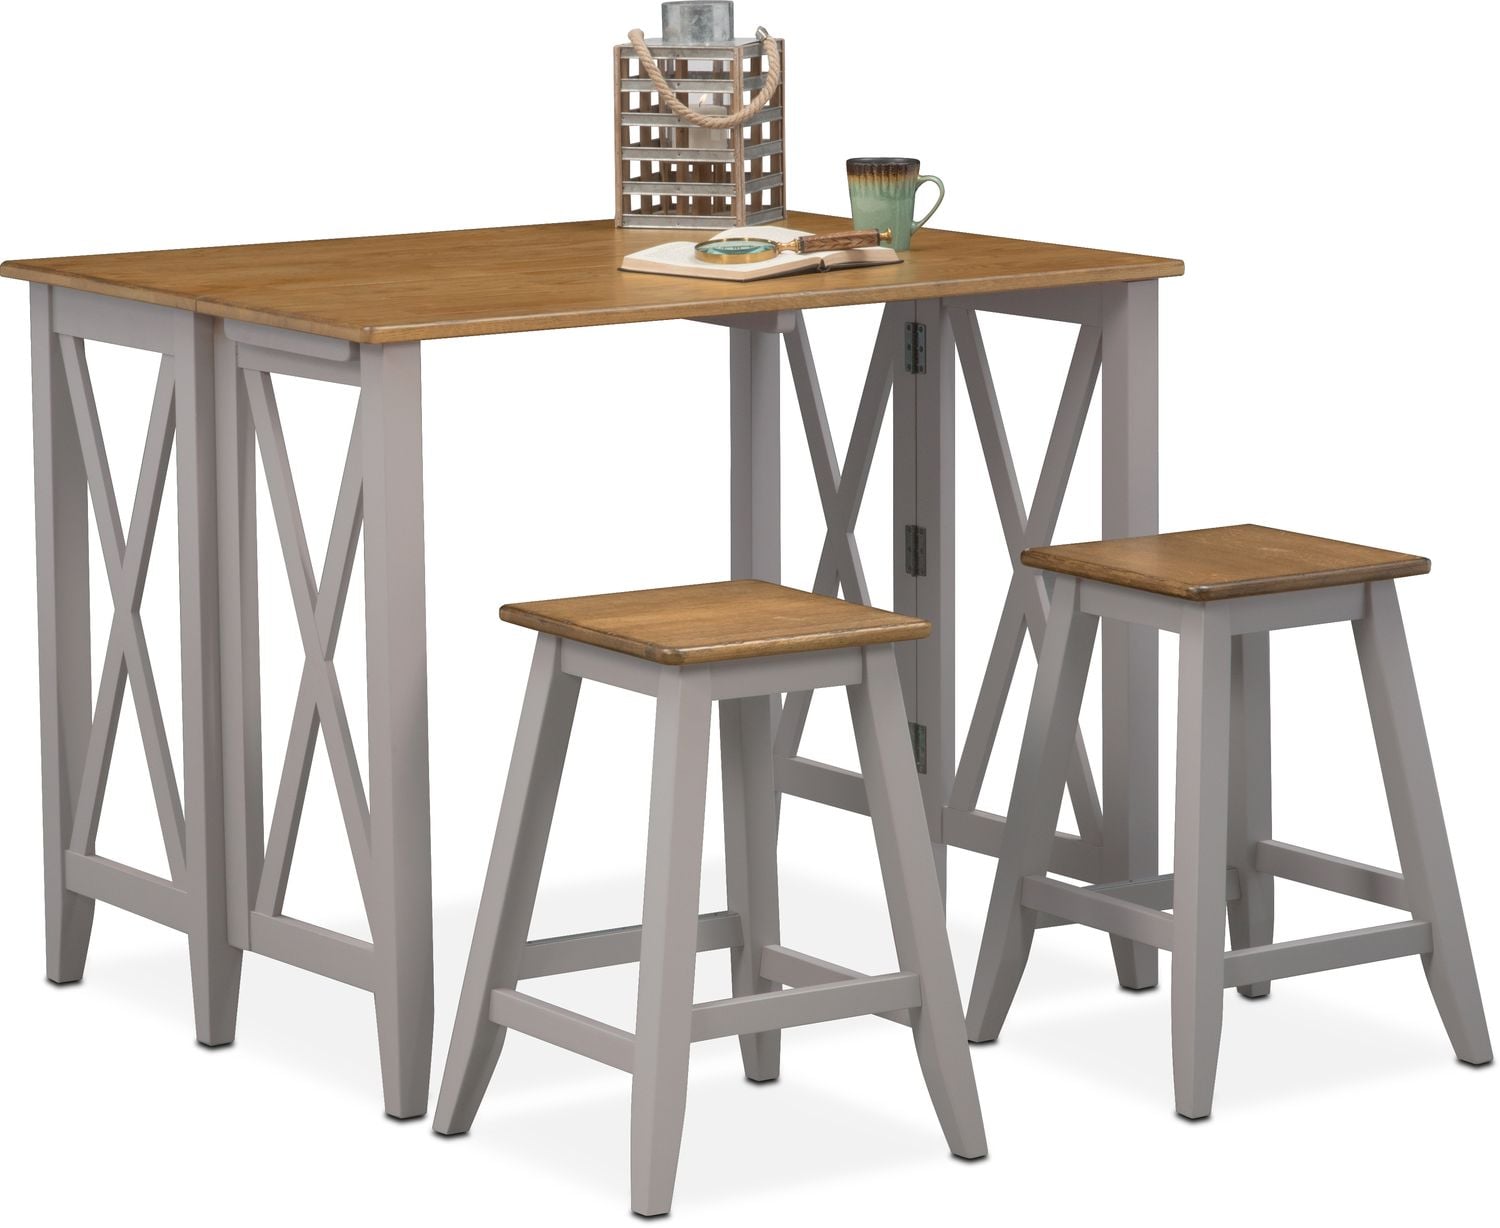 Nantucket Breakfast Bar And 2 Counter Height Stools American